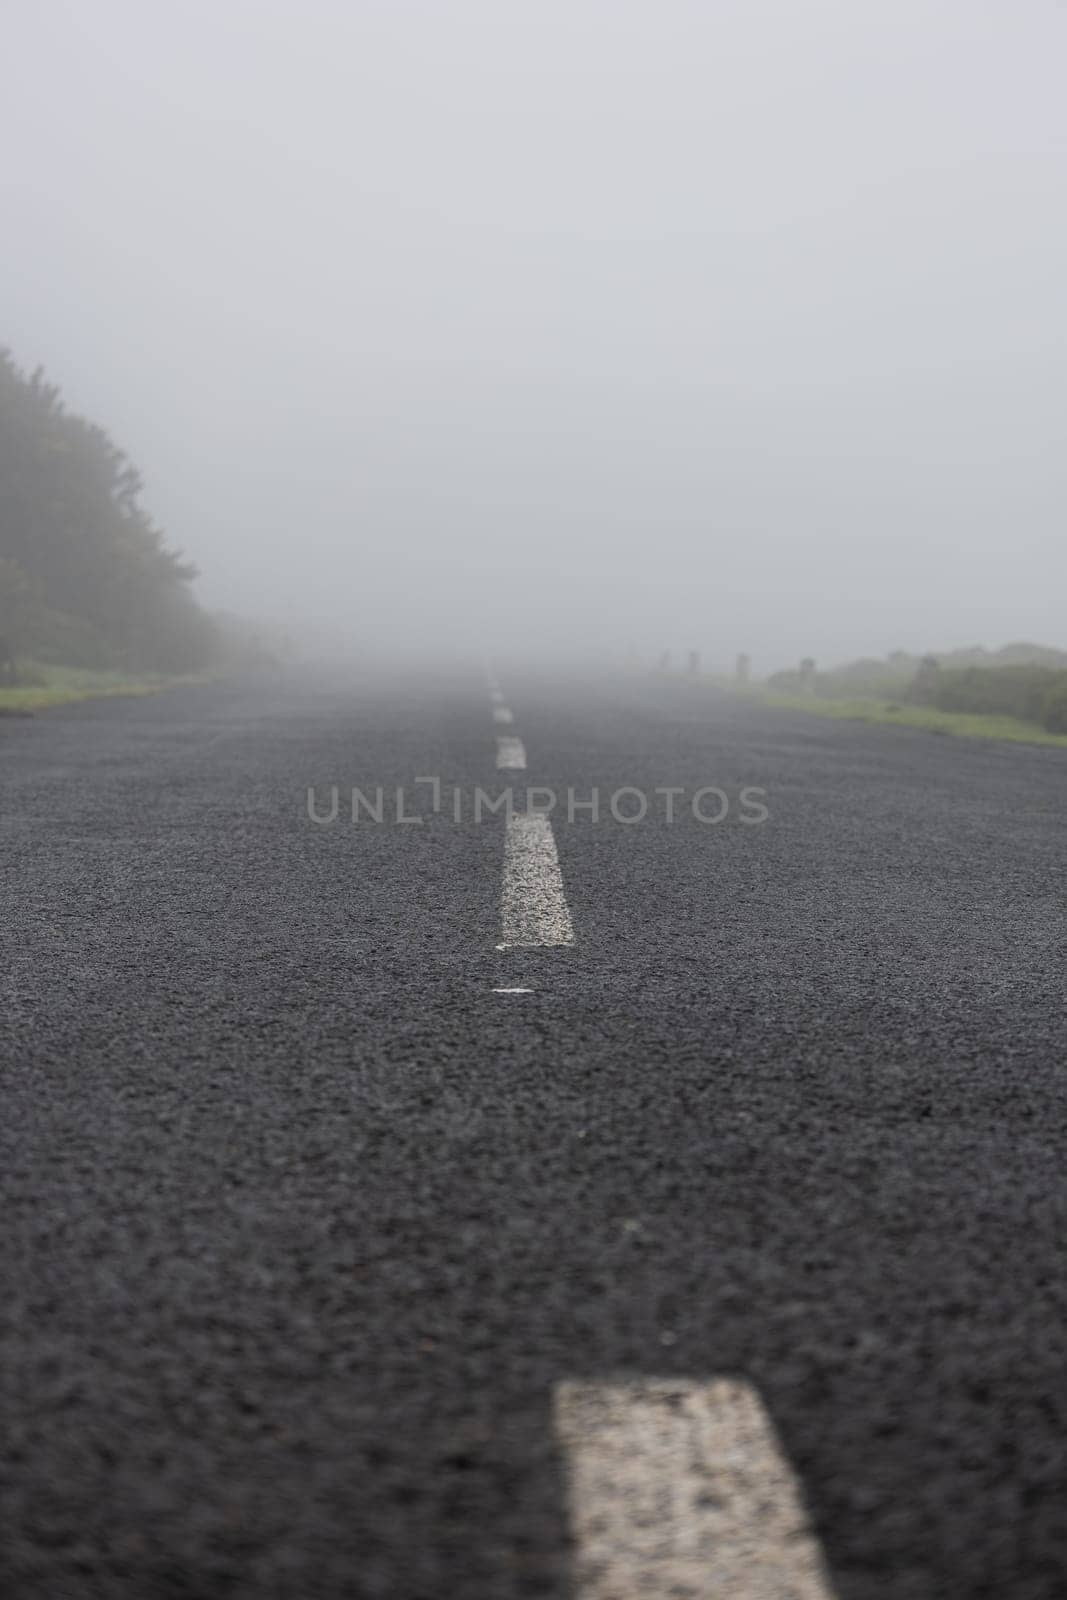 Early morning fog hangs low in the air, obscuring an otherwise empty country road. The tranquil environment is filled with a light mist and peaceful stillness.